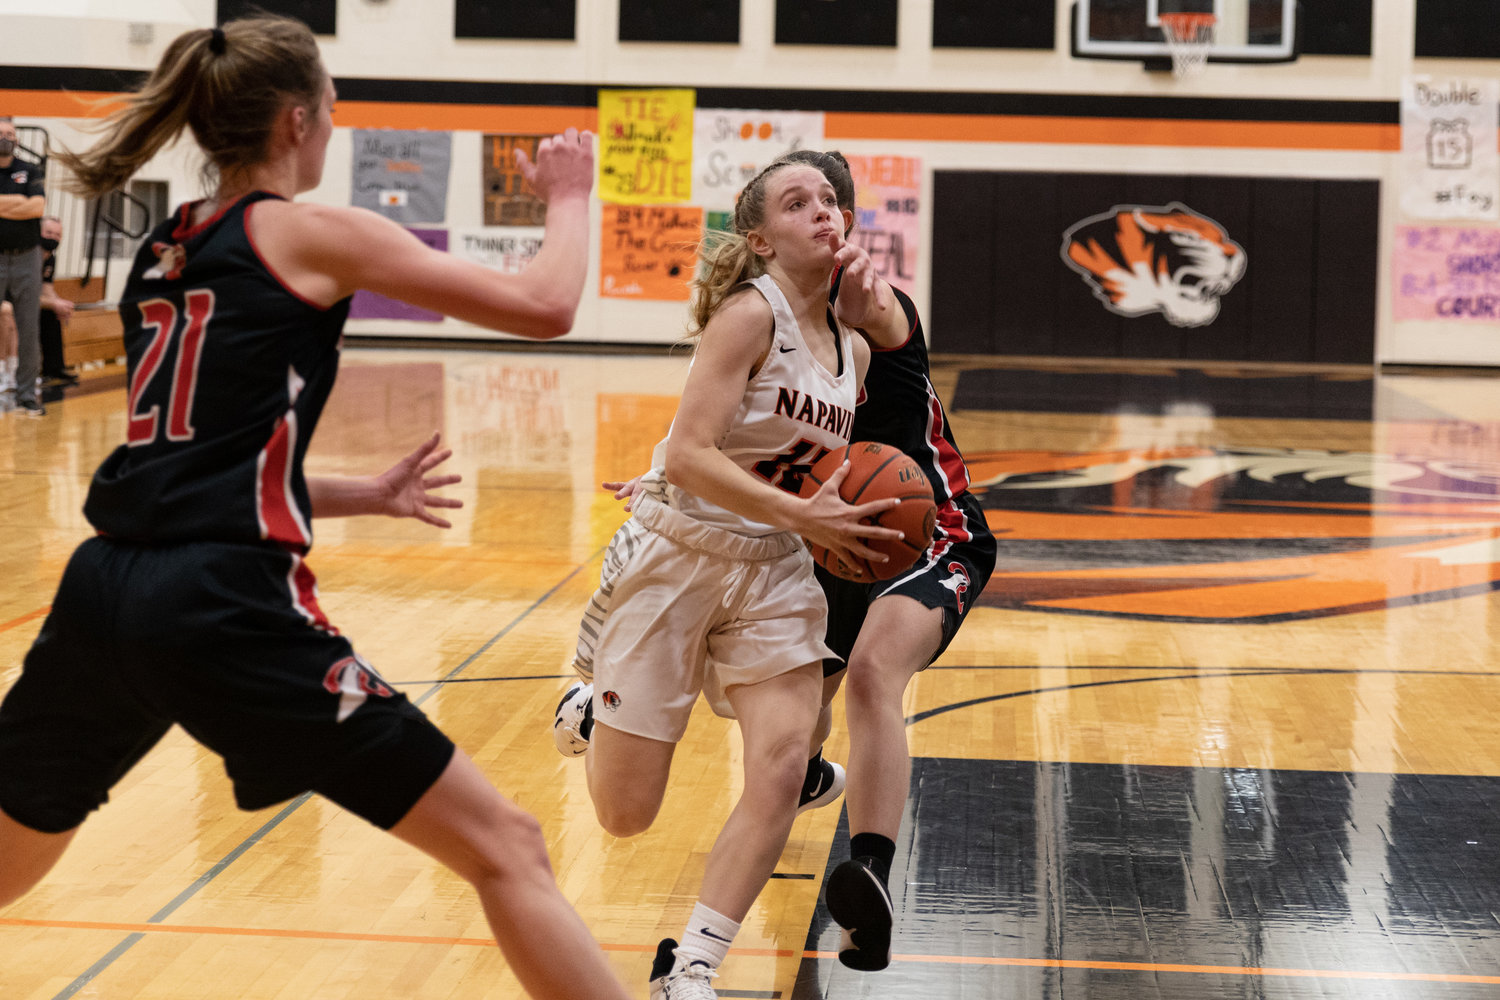 Napavine guard Avery Schutz is fouled while driving for a layup against Raymond Dec. 7.